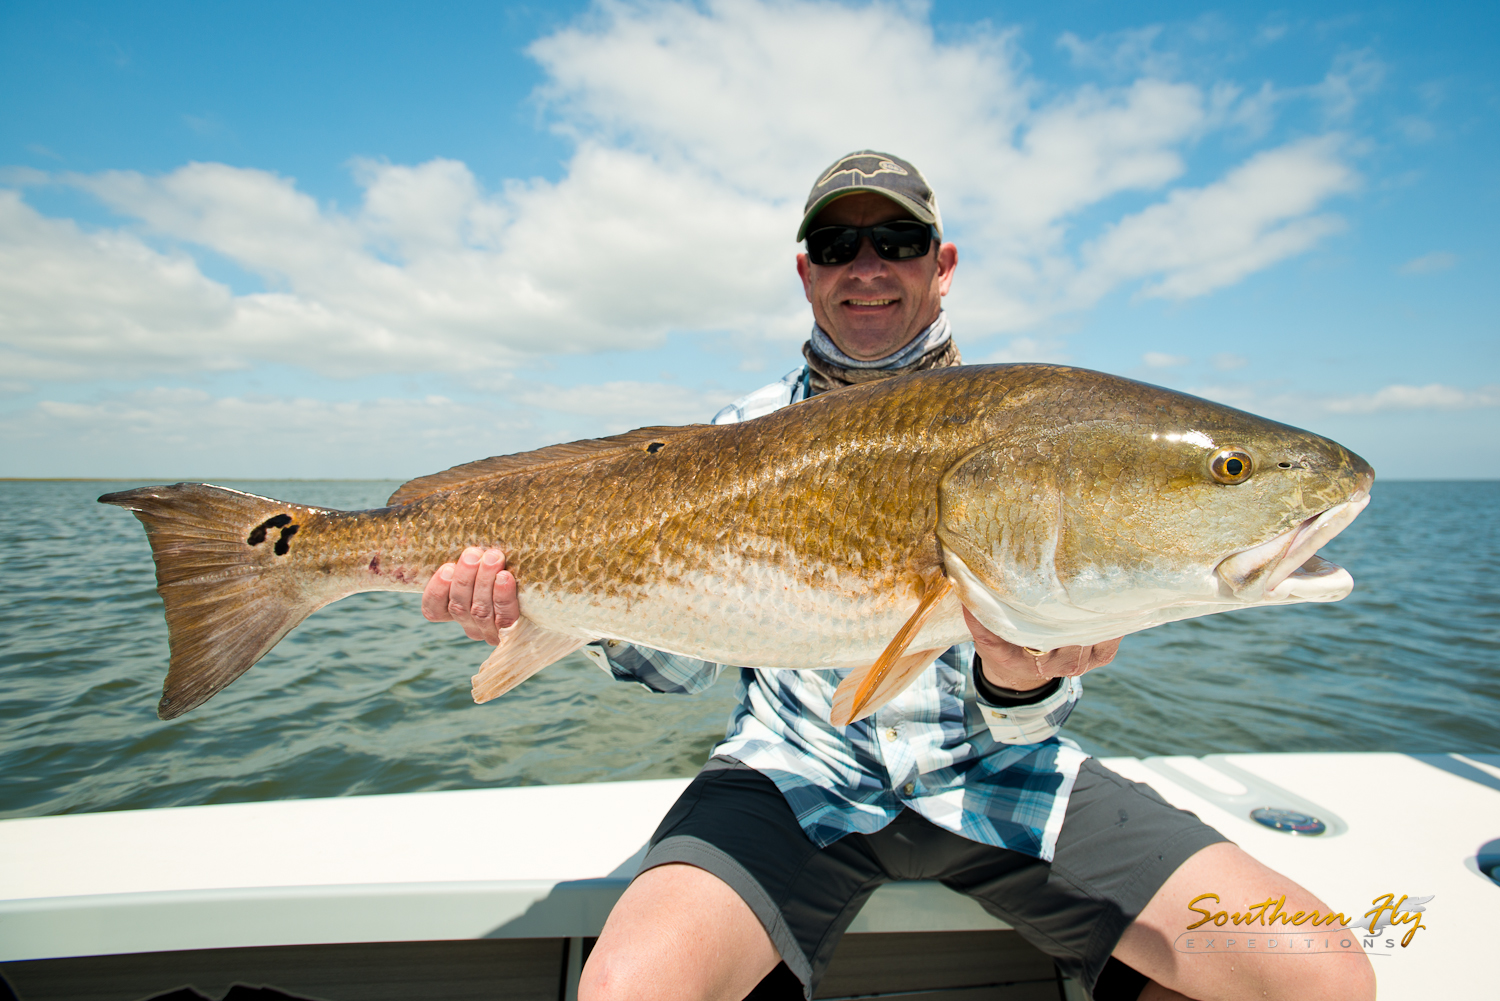 fly fishing new orleans louisiana with southern fly expeditions 